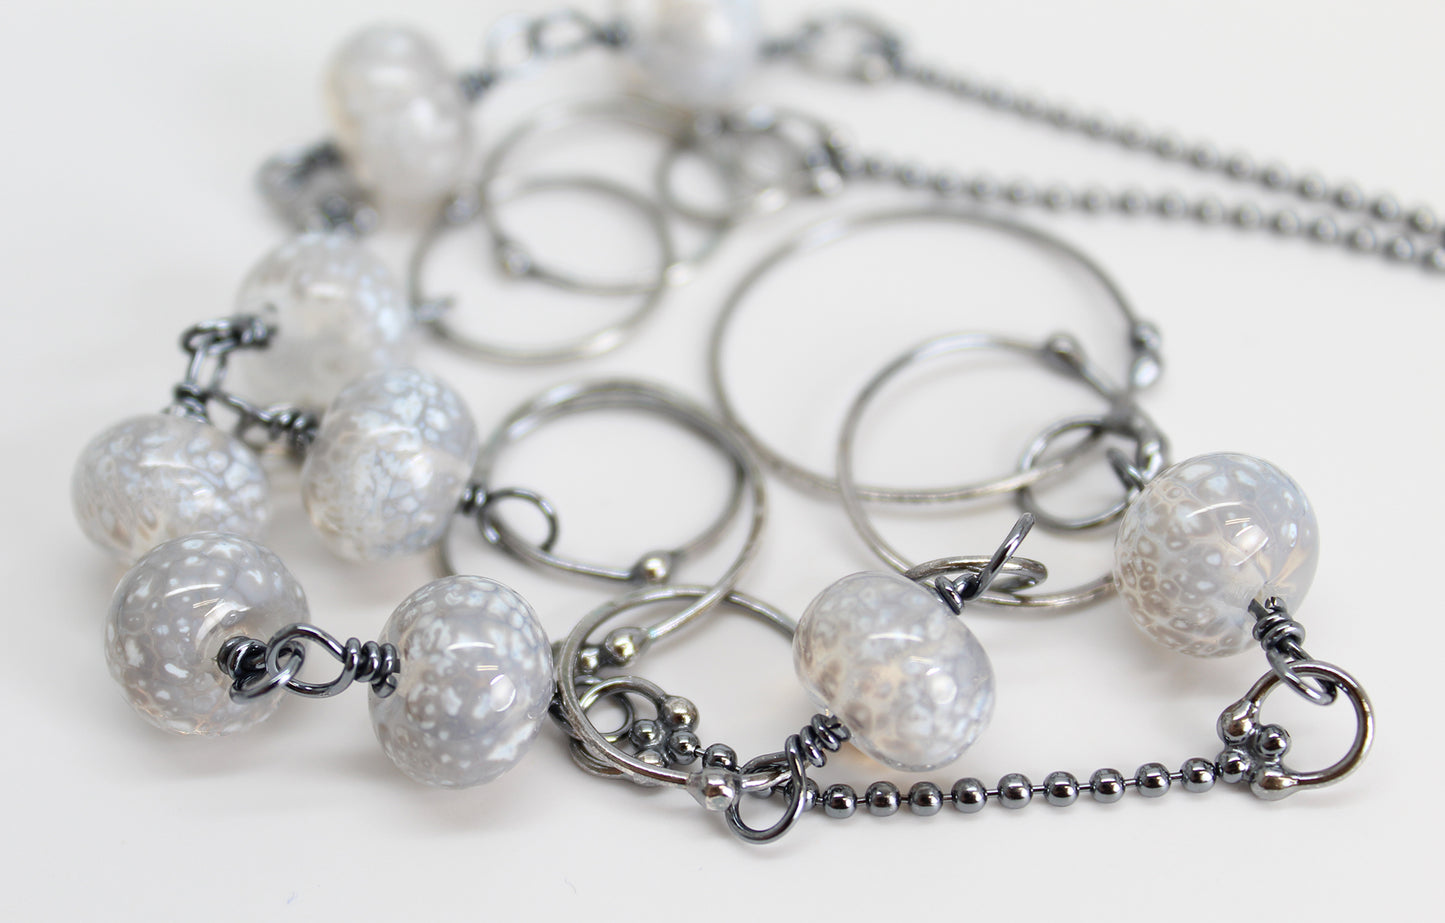 Silver Chain Necklace with Artisan Embossed Beads - Silvertraits